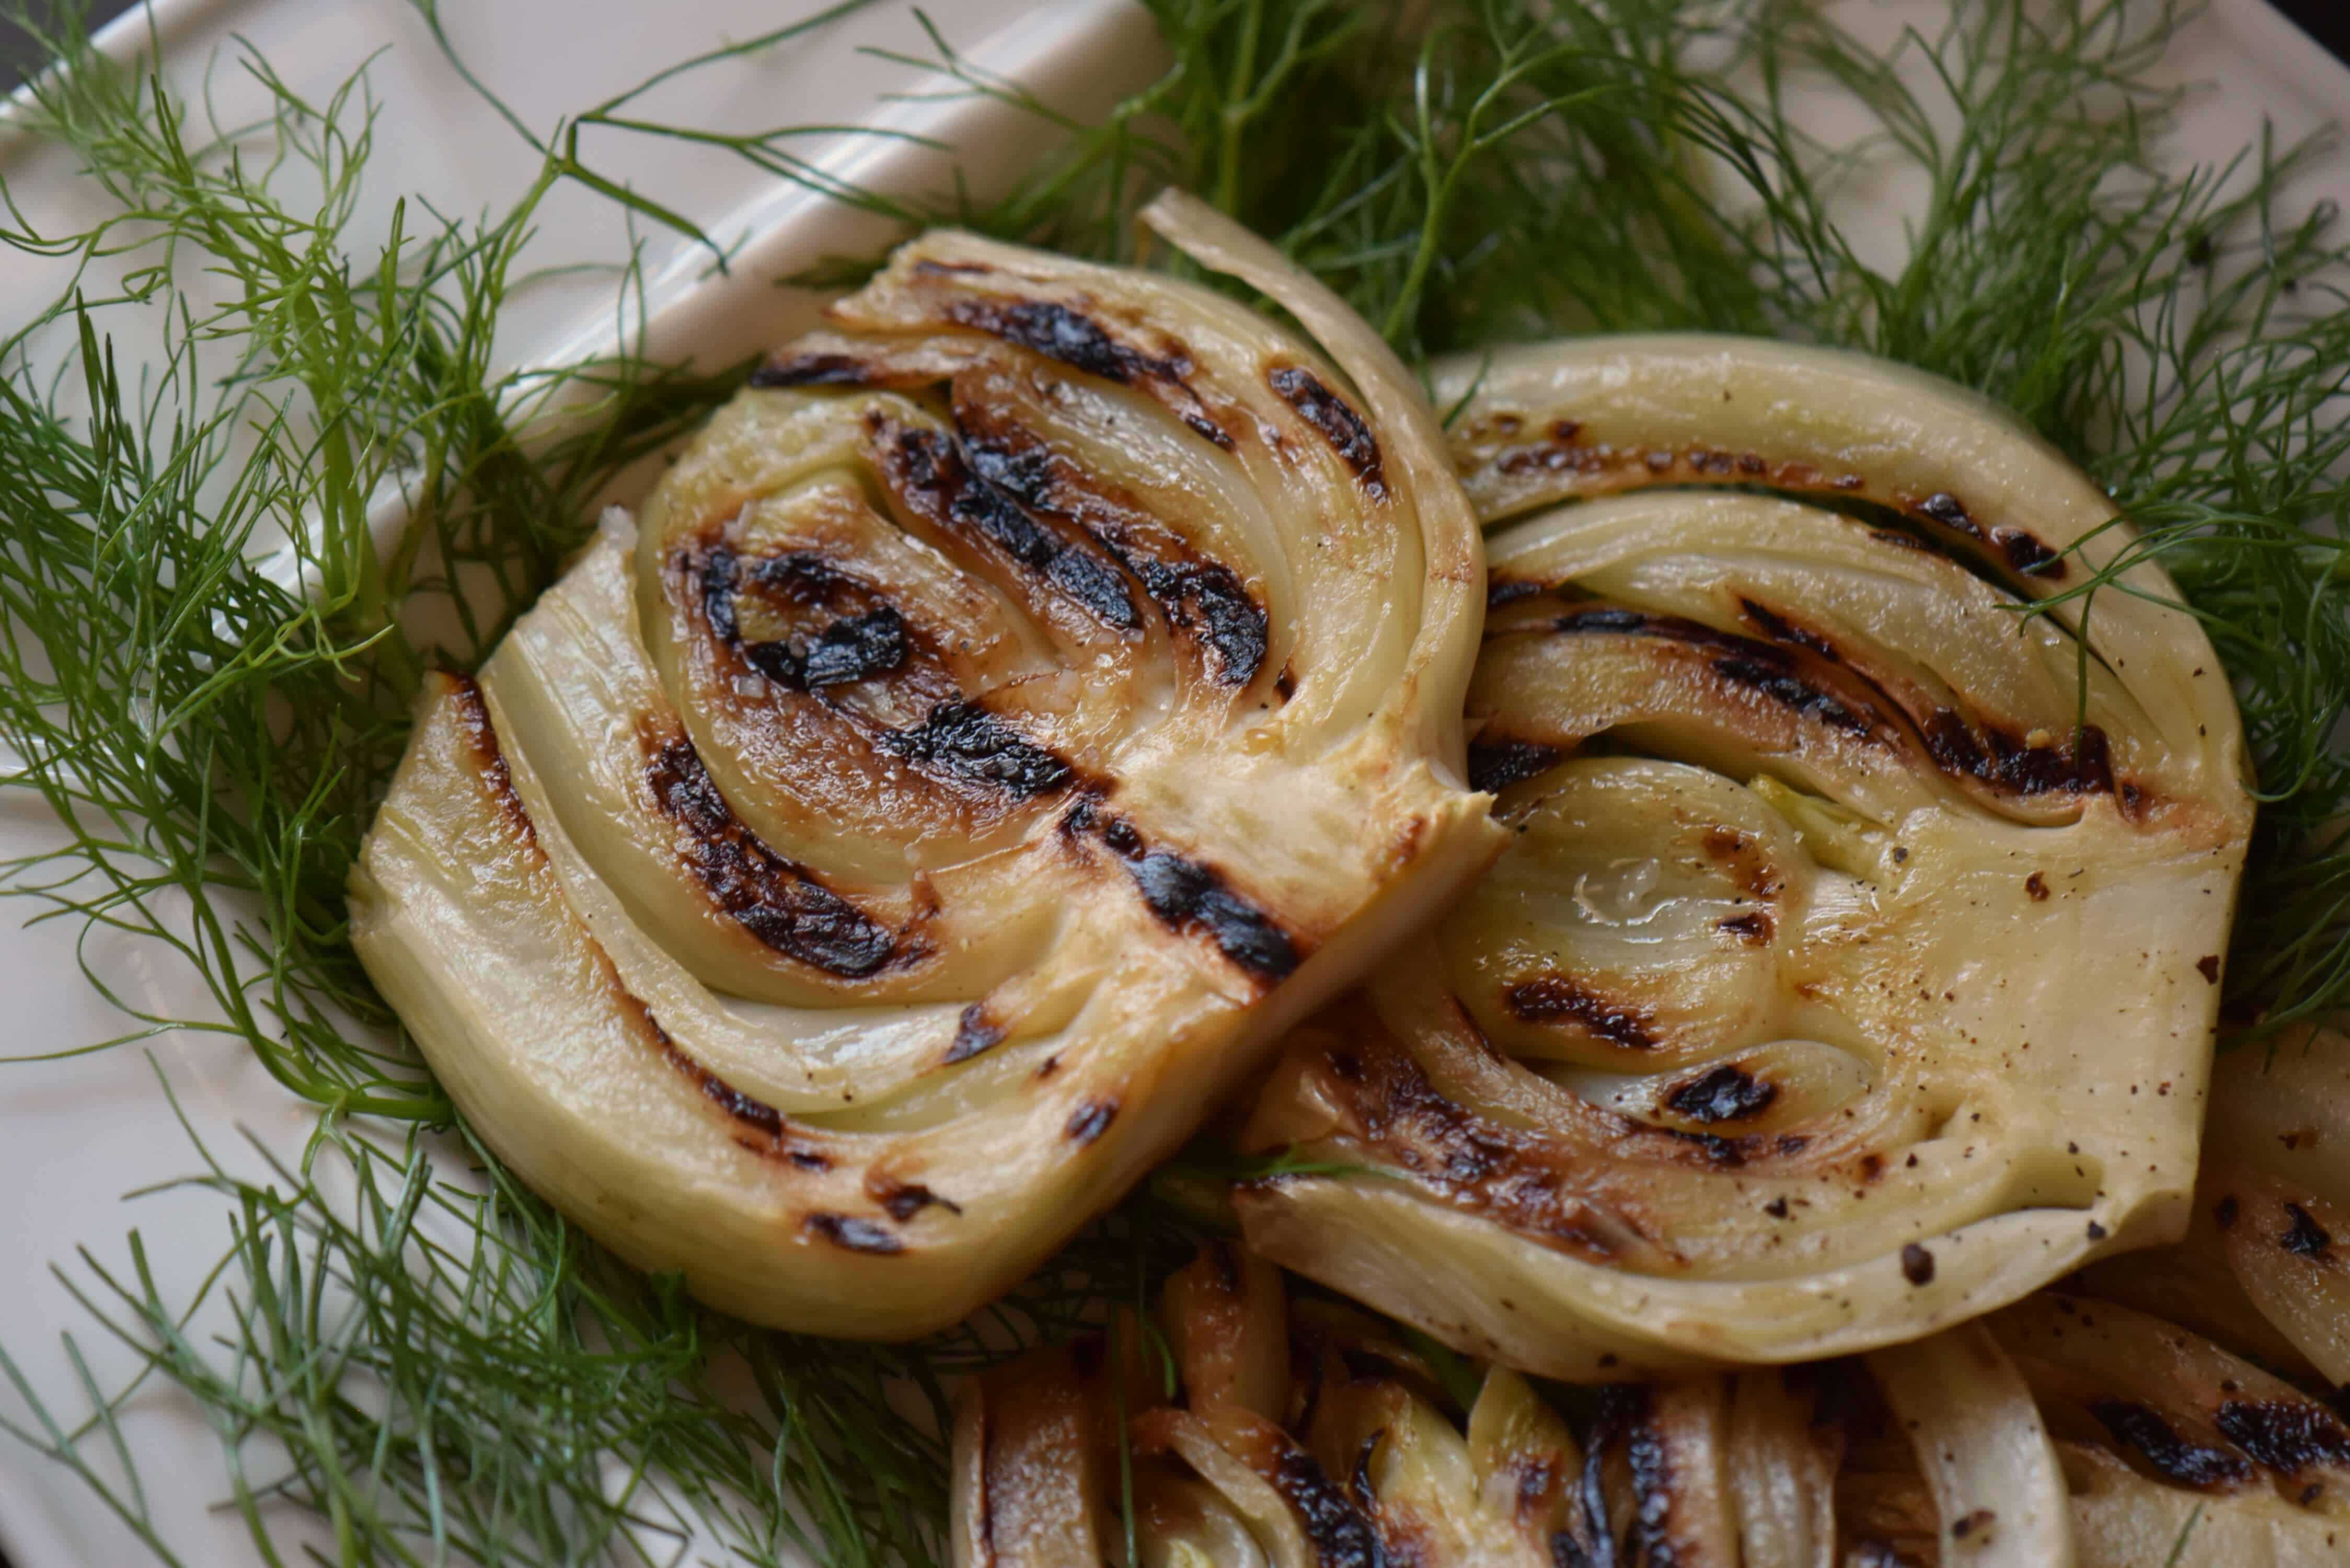 A close up of grilled fennel with barbecue markings.